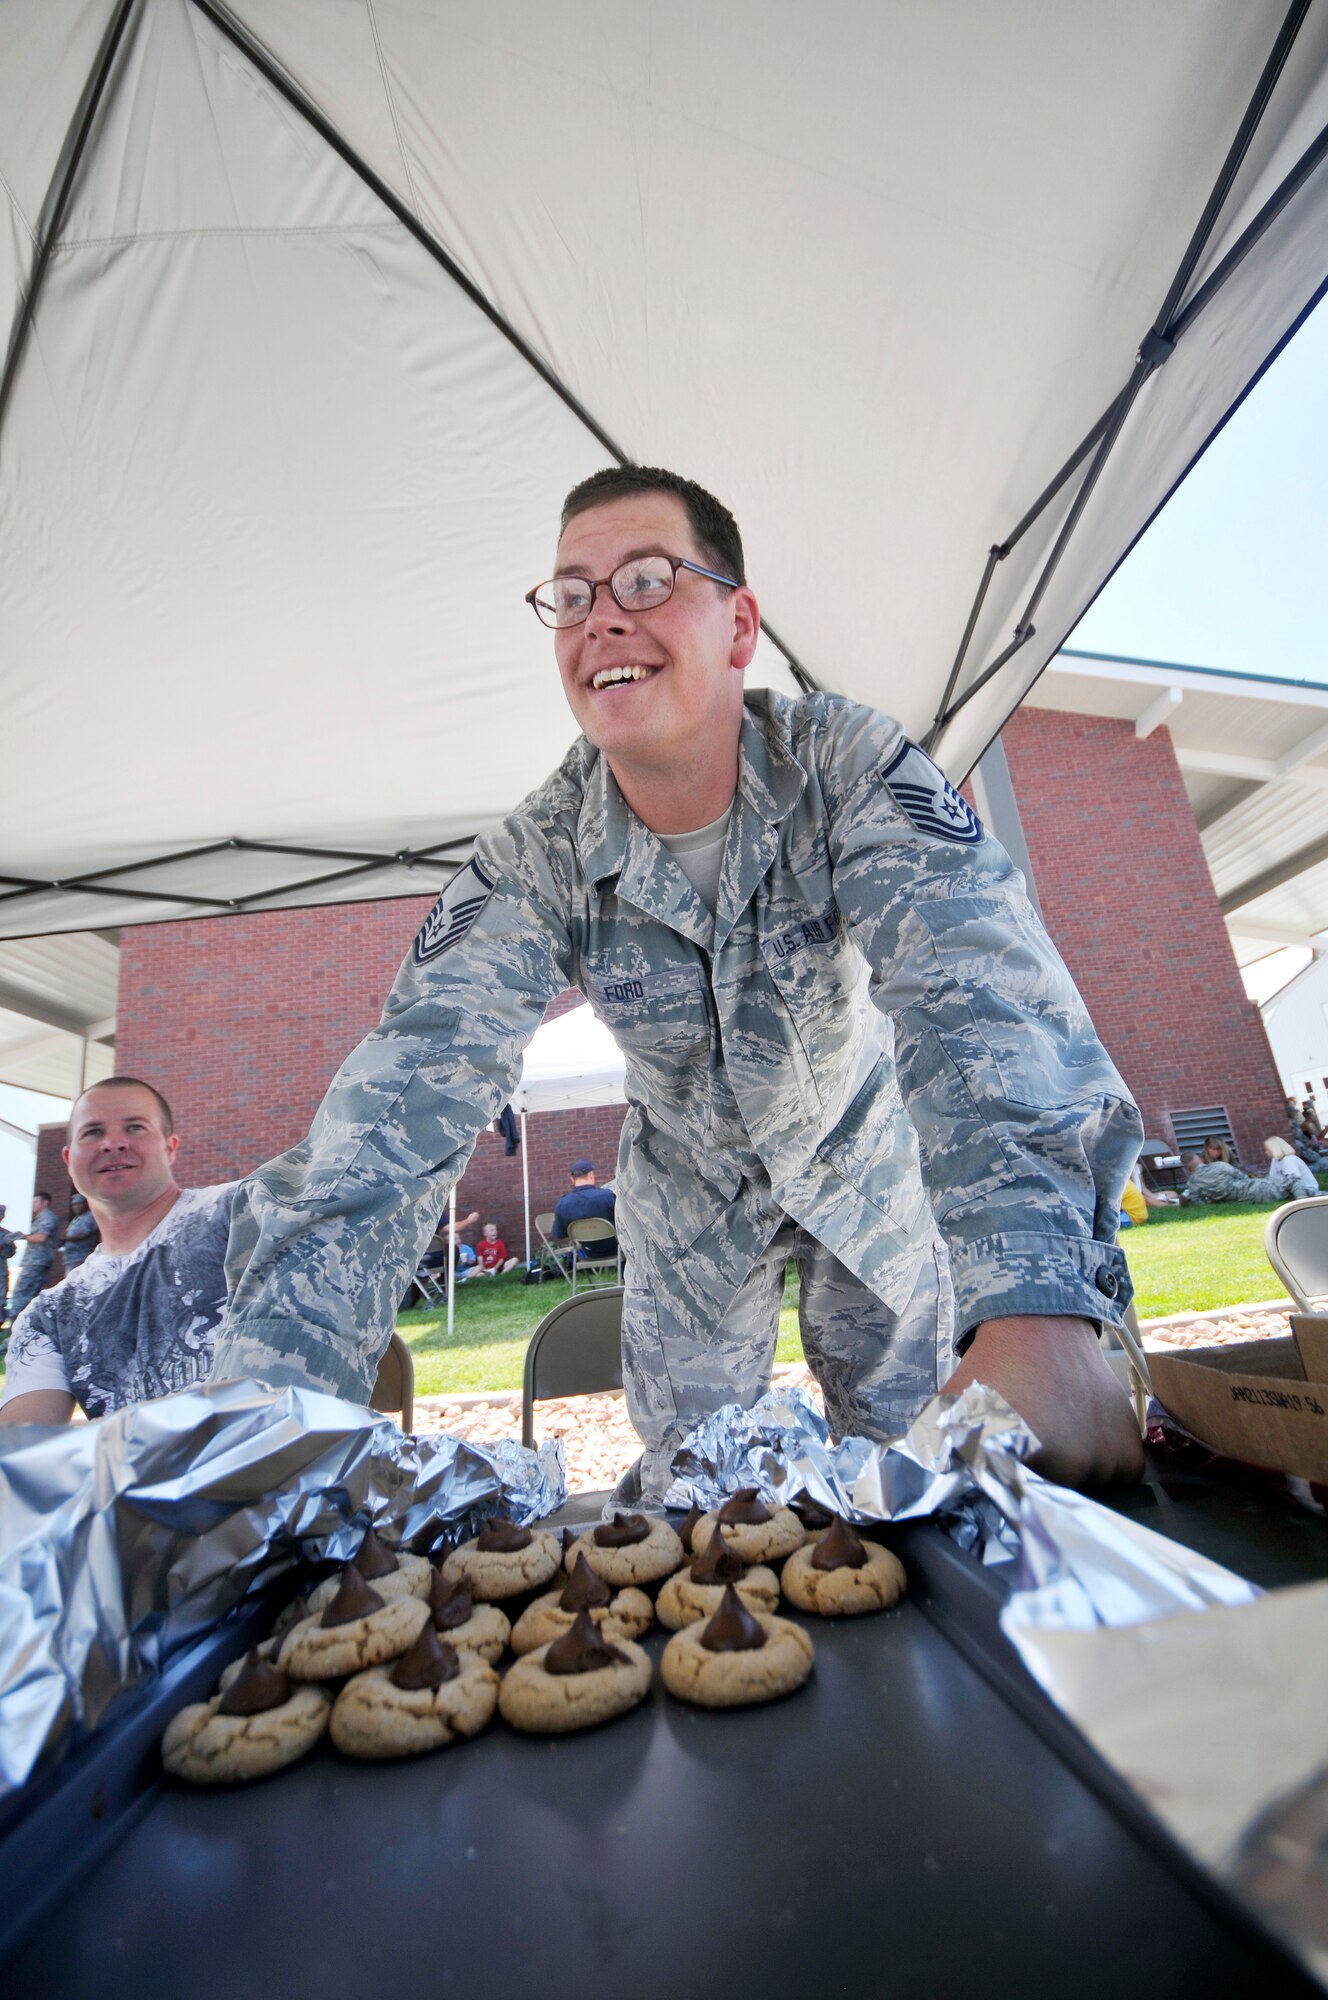 SSgt. Tim Smith looks on as MSgt. Ron Ford sells cookies at the 151st Air Refueling Wing's 2012 Airman Appreciation day at the Utah Air National Guard base in Salt Lake City Utah, June 2, 2012. (U.S. Air Force Photo by Tech. Sgt. Jeremy Giacoletto-Stegall/Released)